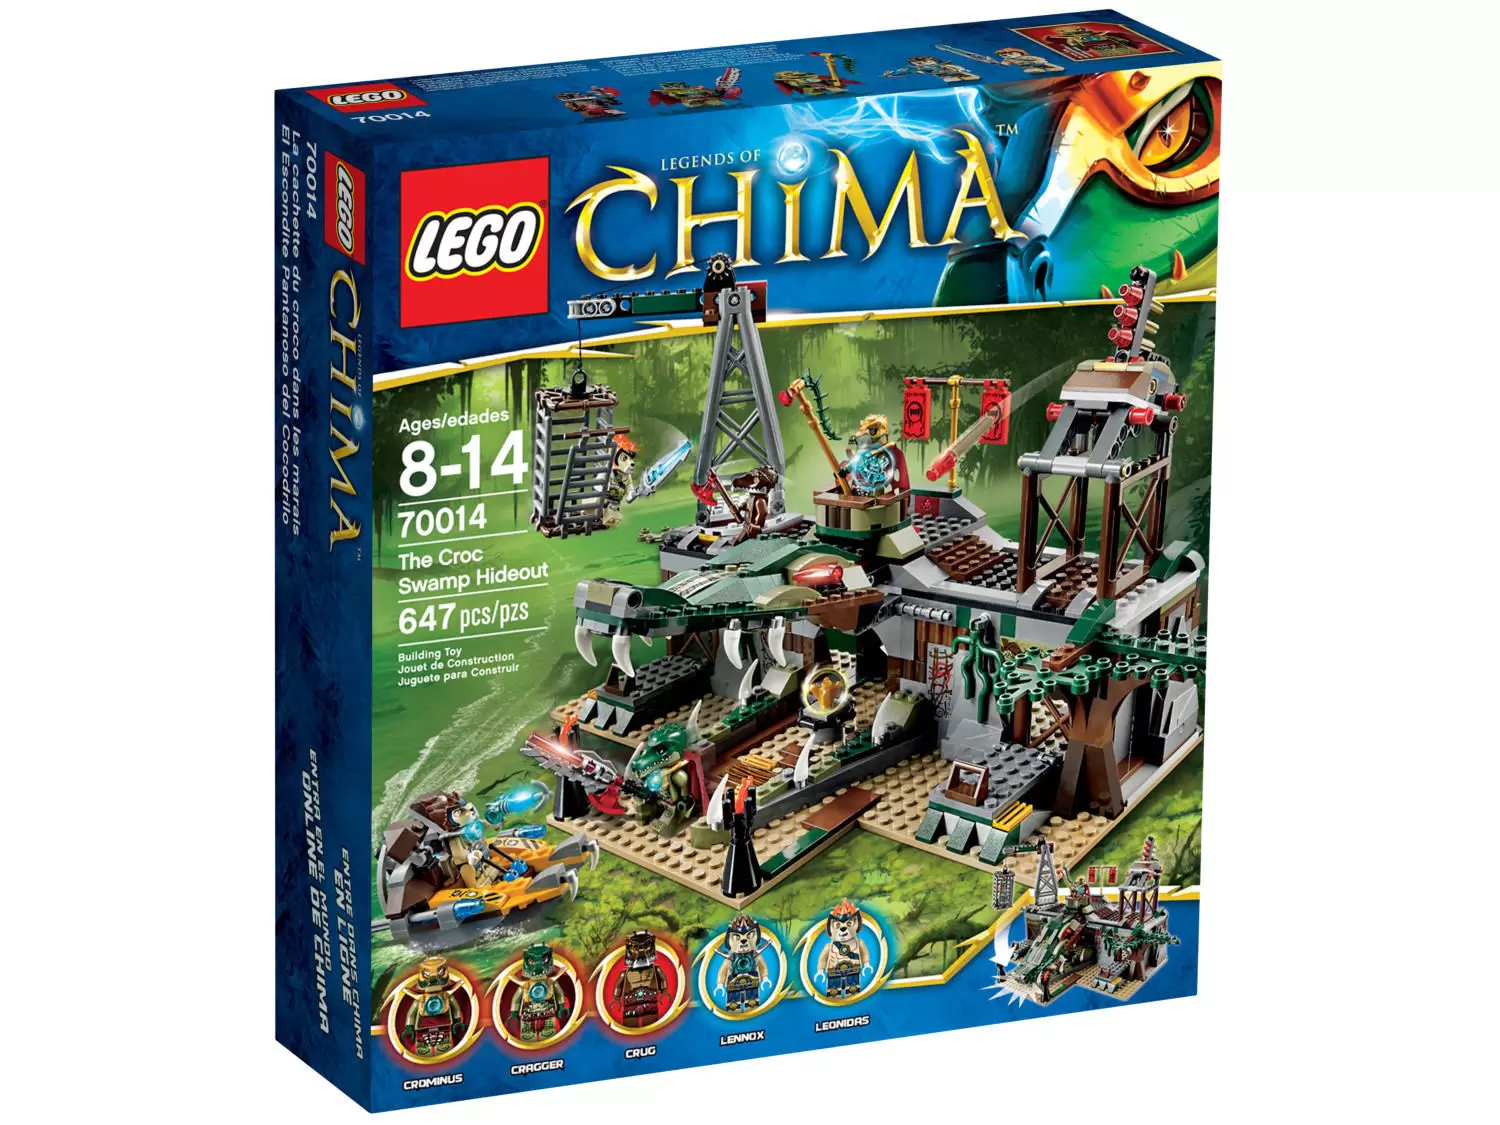 LEGO Legends of Chima - The Croc Swamp Hideout